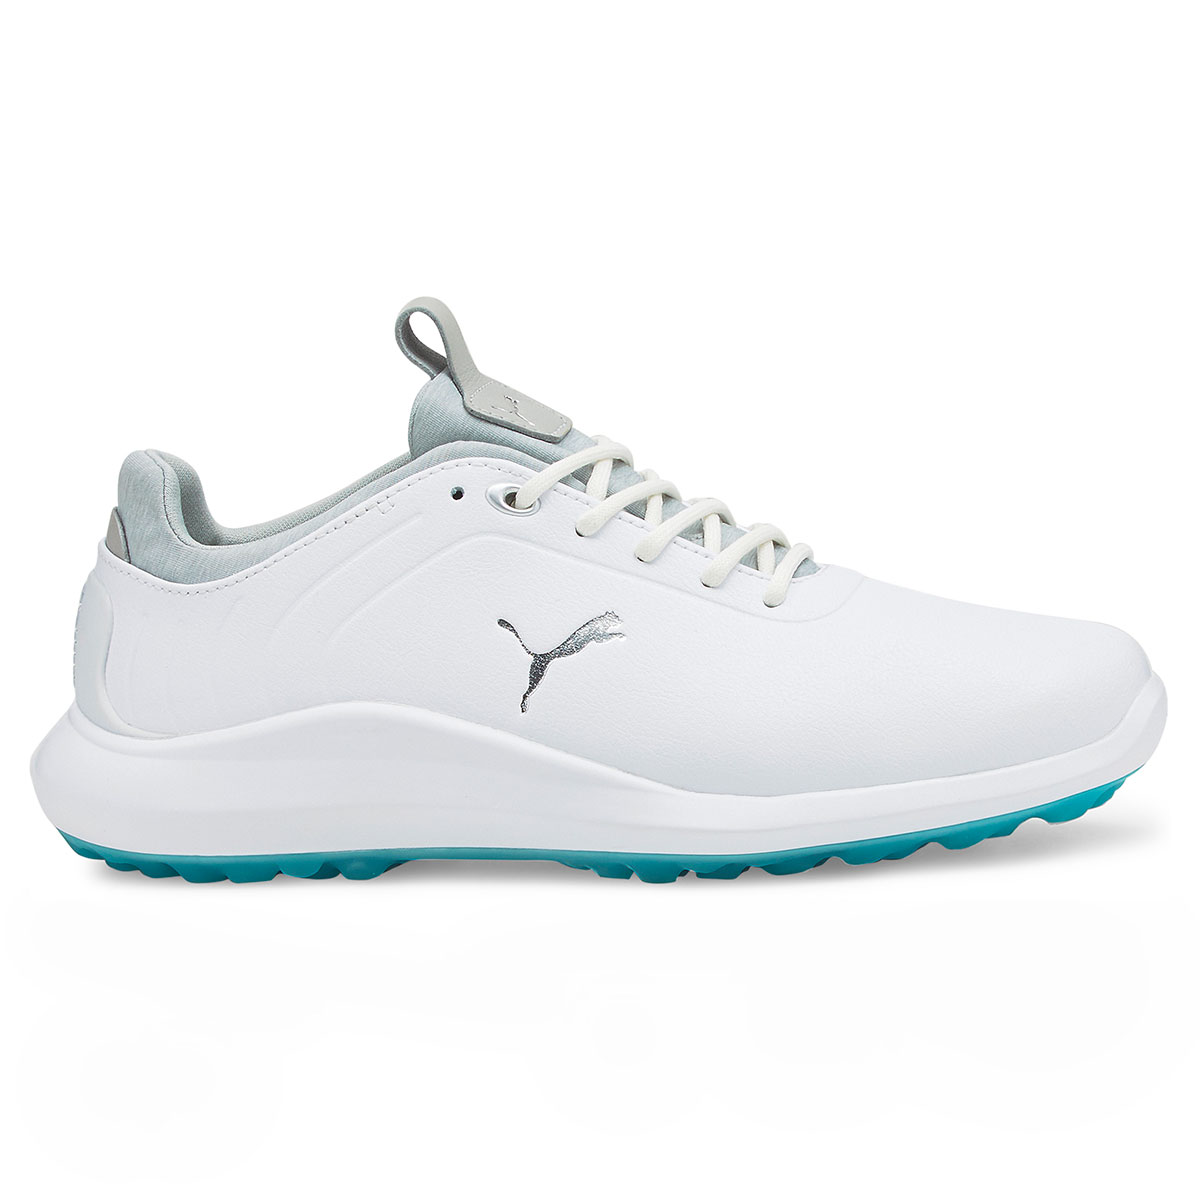 PUMA Ladies IGNITE Pro Waterproof Spikeless Golf Shoes from american golf